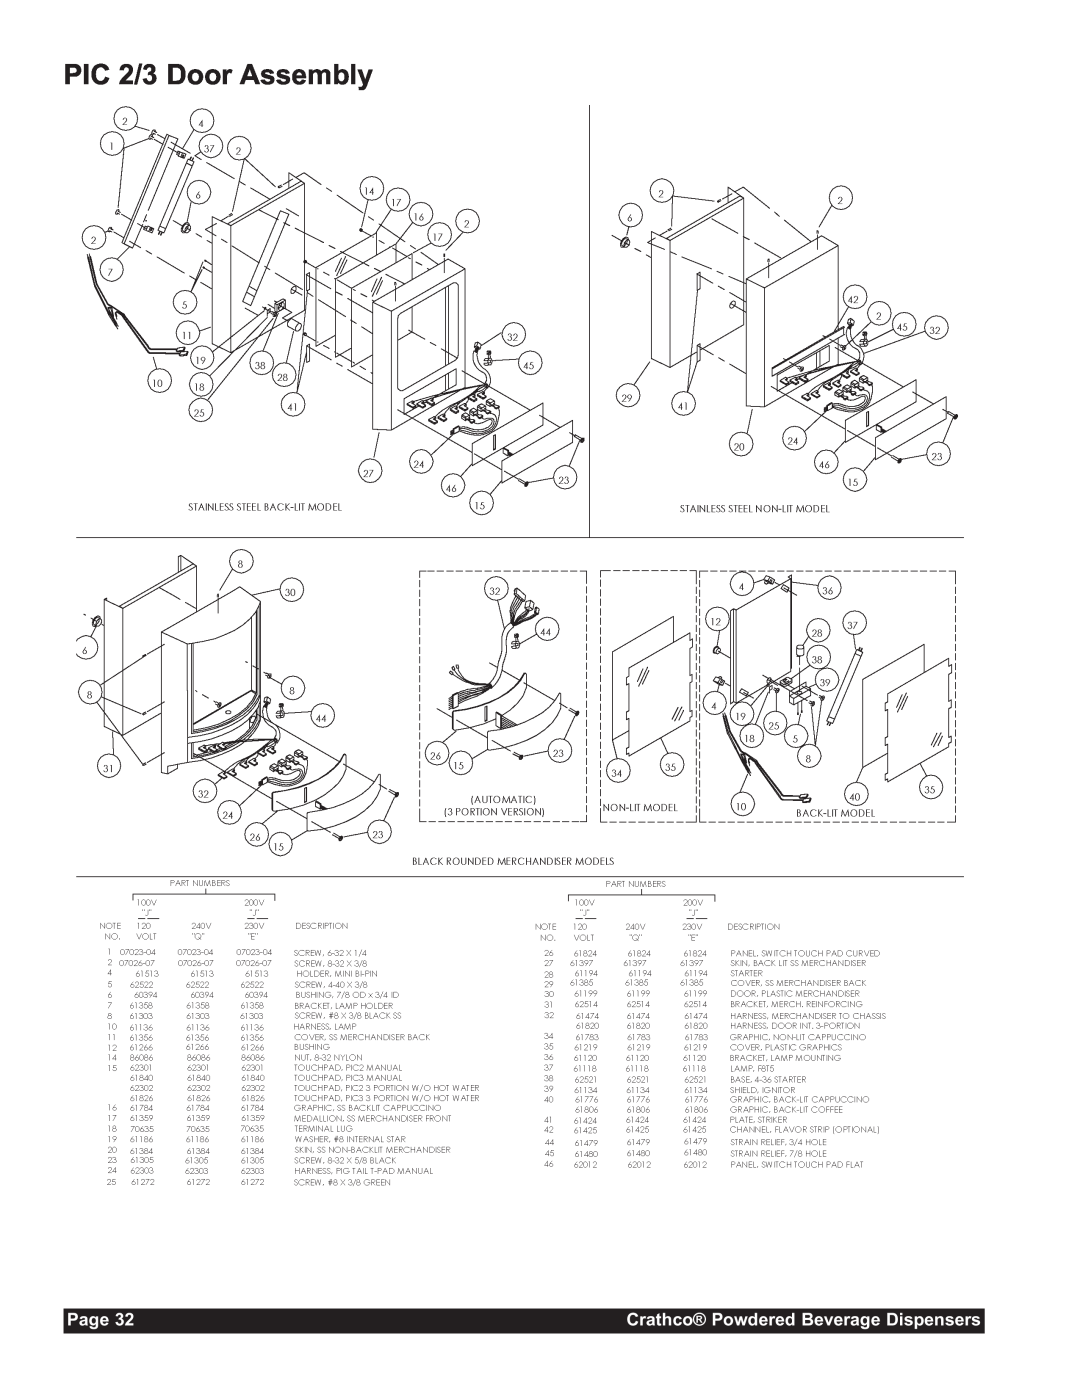 Grindmaster CC-302-20 service manual PIC 2/3 Door Assembly, Page, Crathco Powdered Beverage Dispensers 